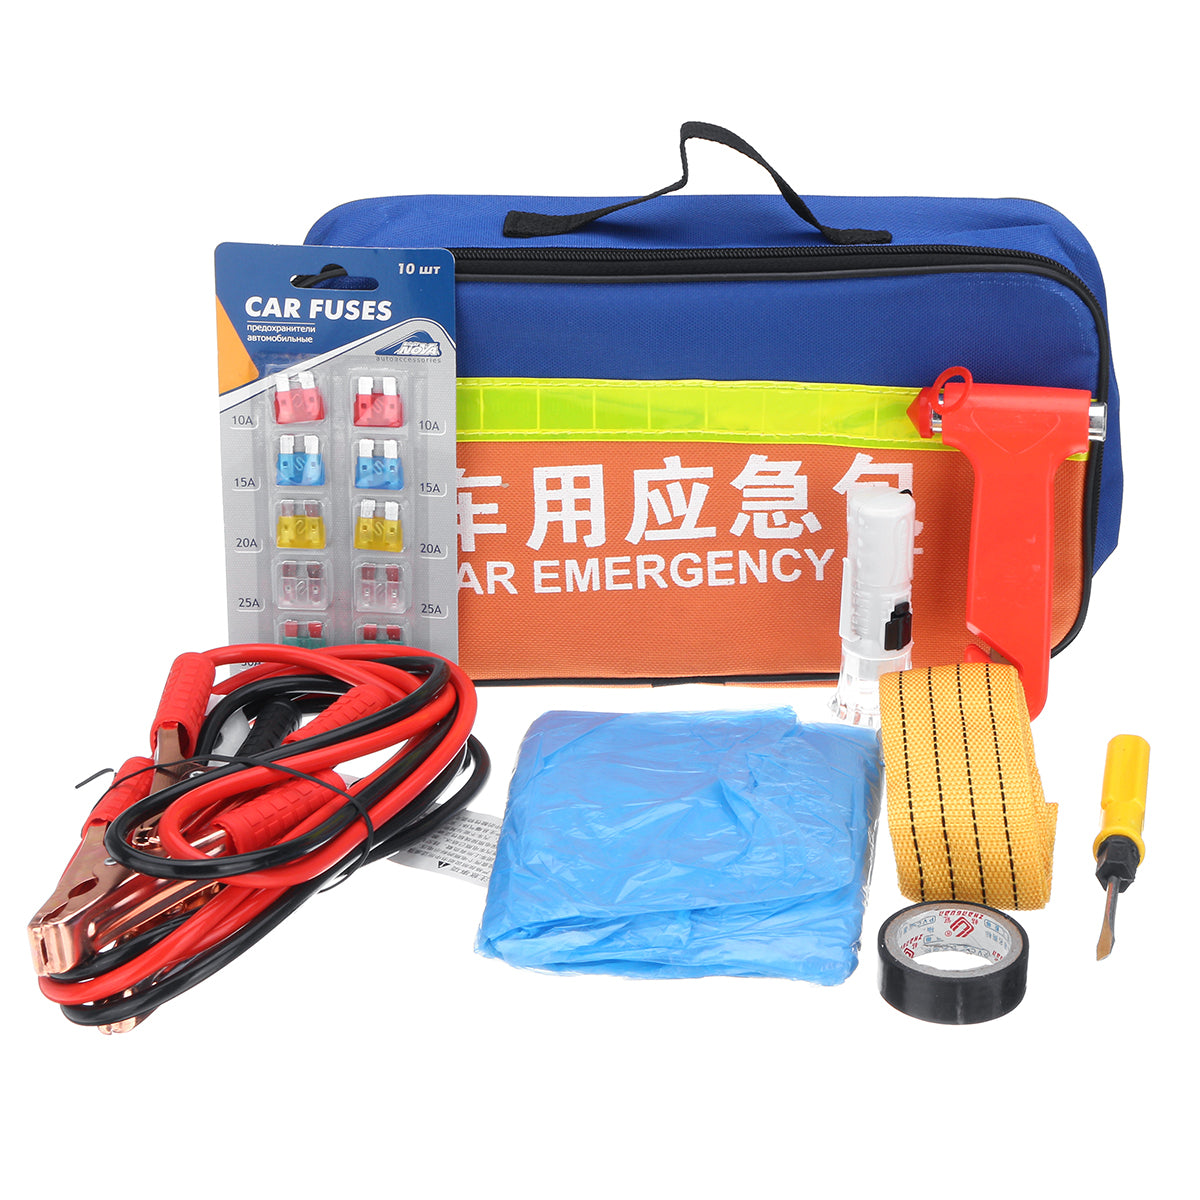 Coral Vehicle First Aid Emergency Tools Kit Car Practical Rescue Chartered With Suit